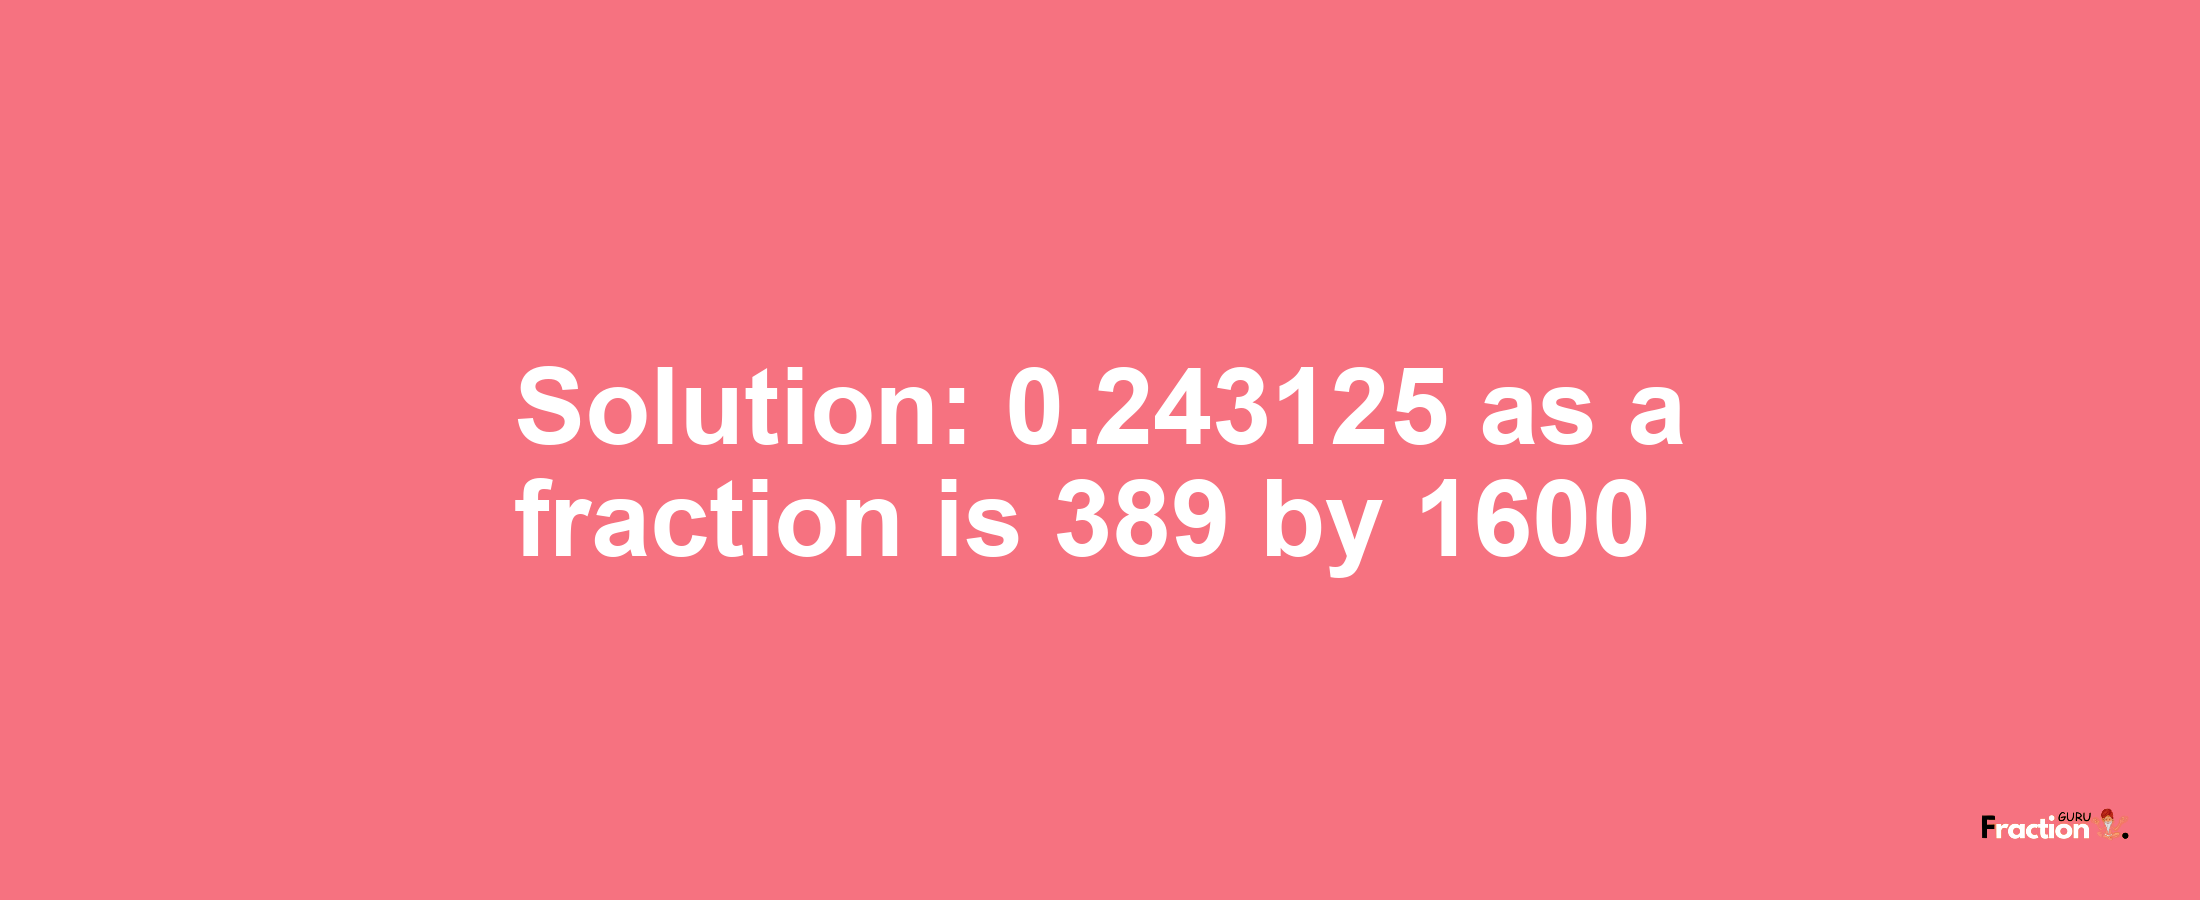 Solution:0.243125 as a fraction is 389/1600